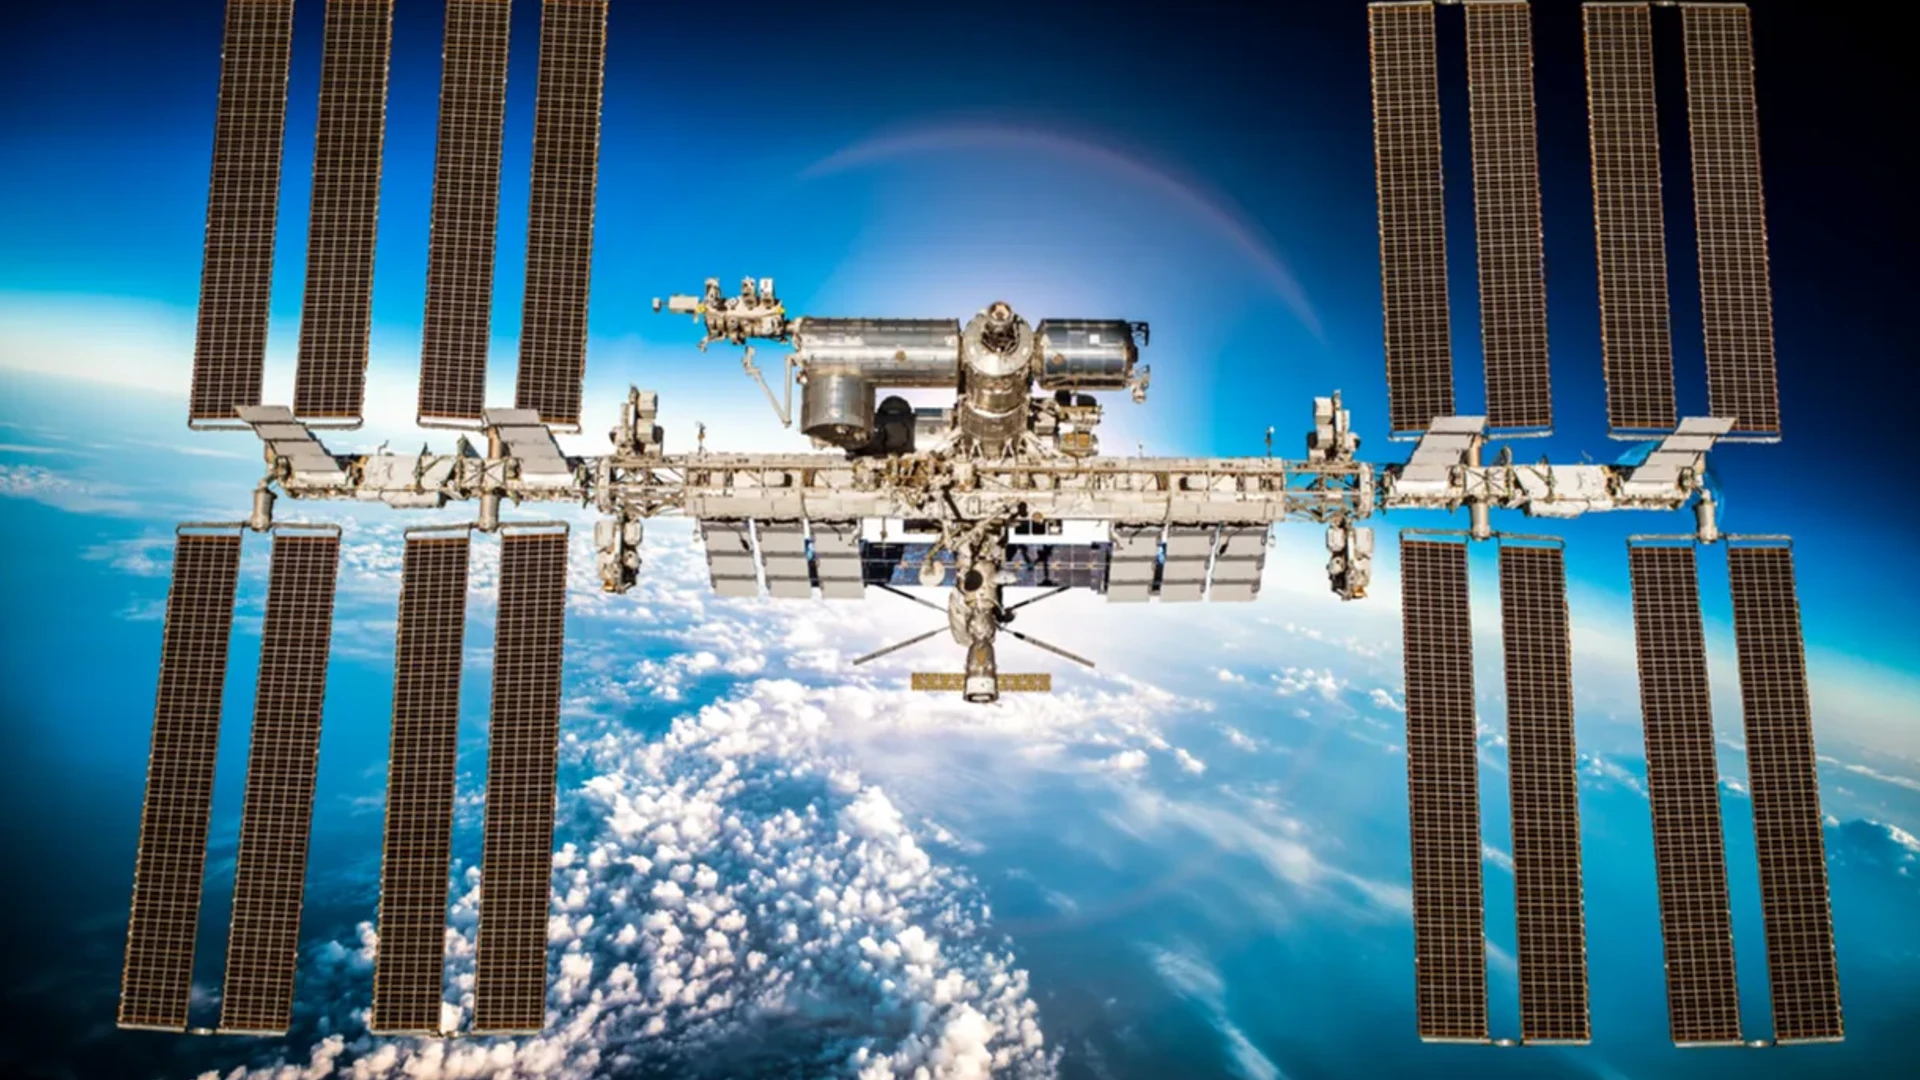 In 2031, the International Space Station will be Rest in the Pacific Ocean